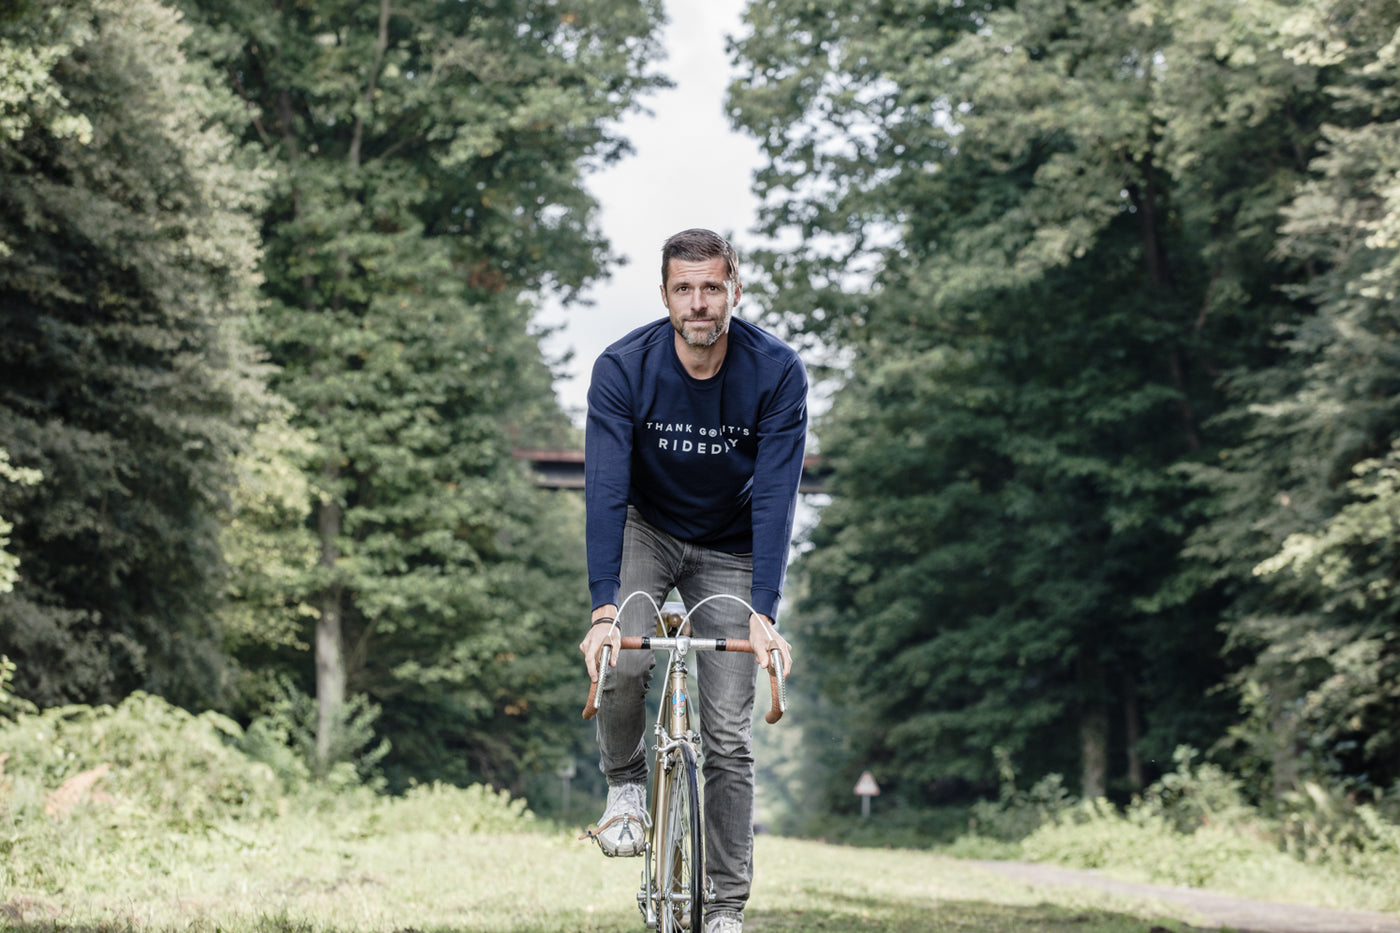 Lifestyle apparel inspired by cycling